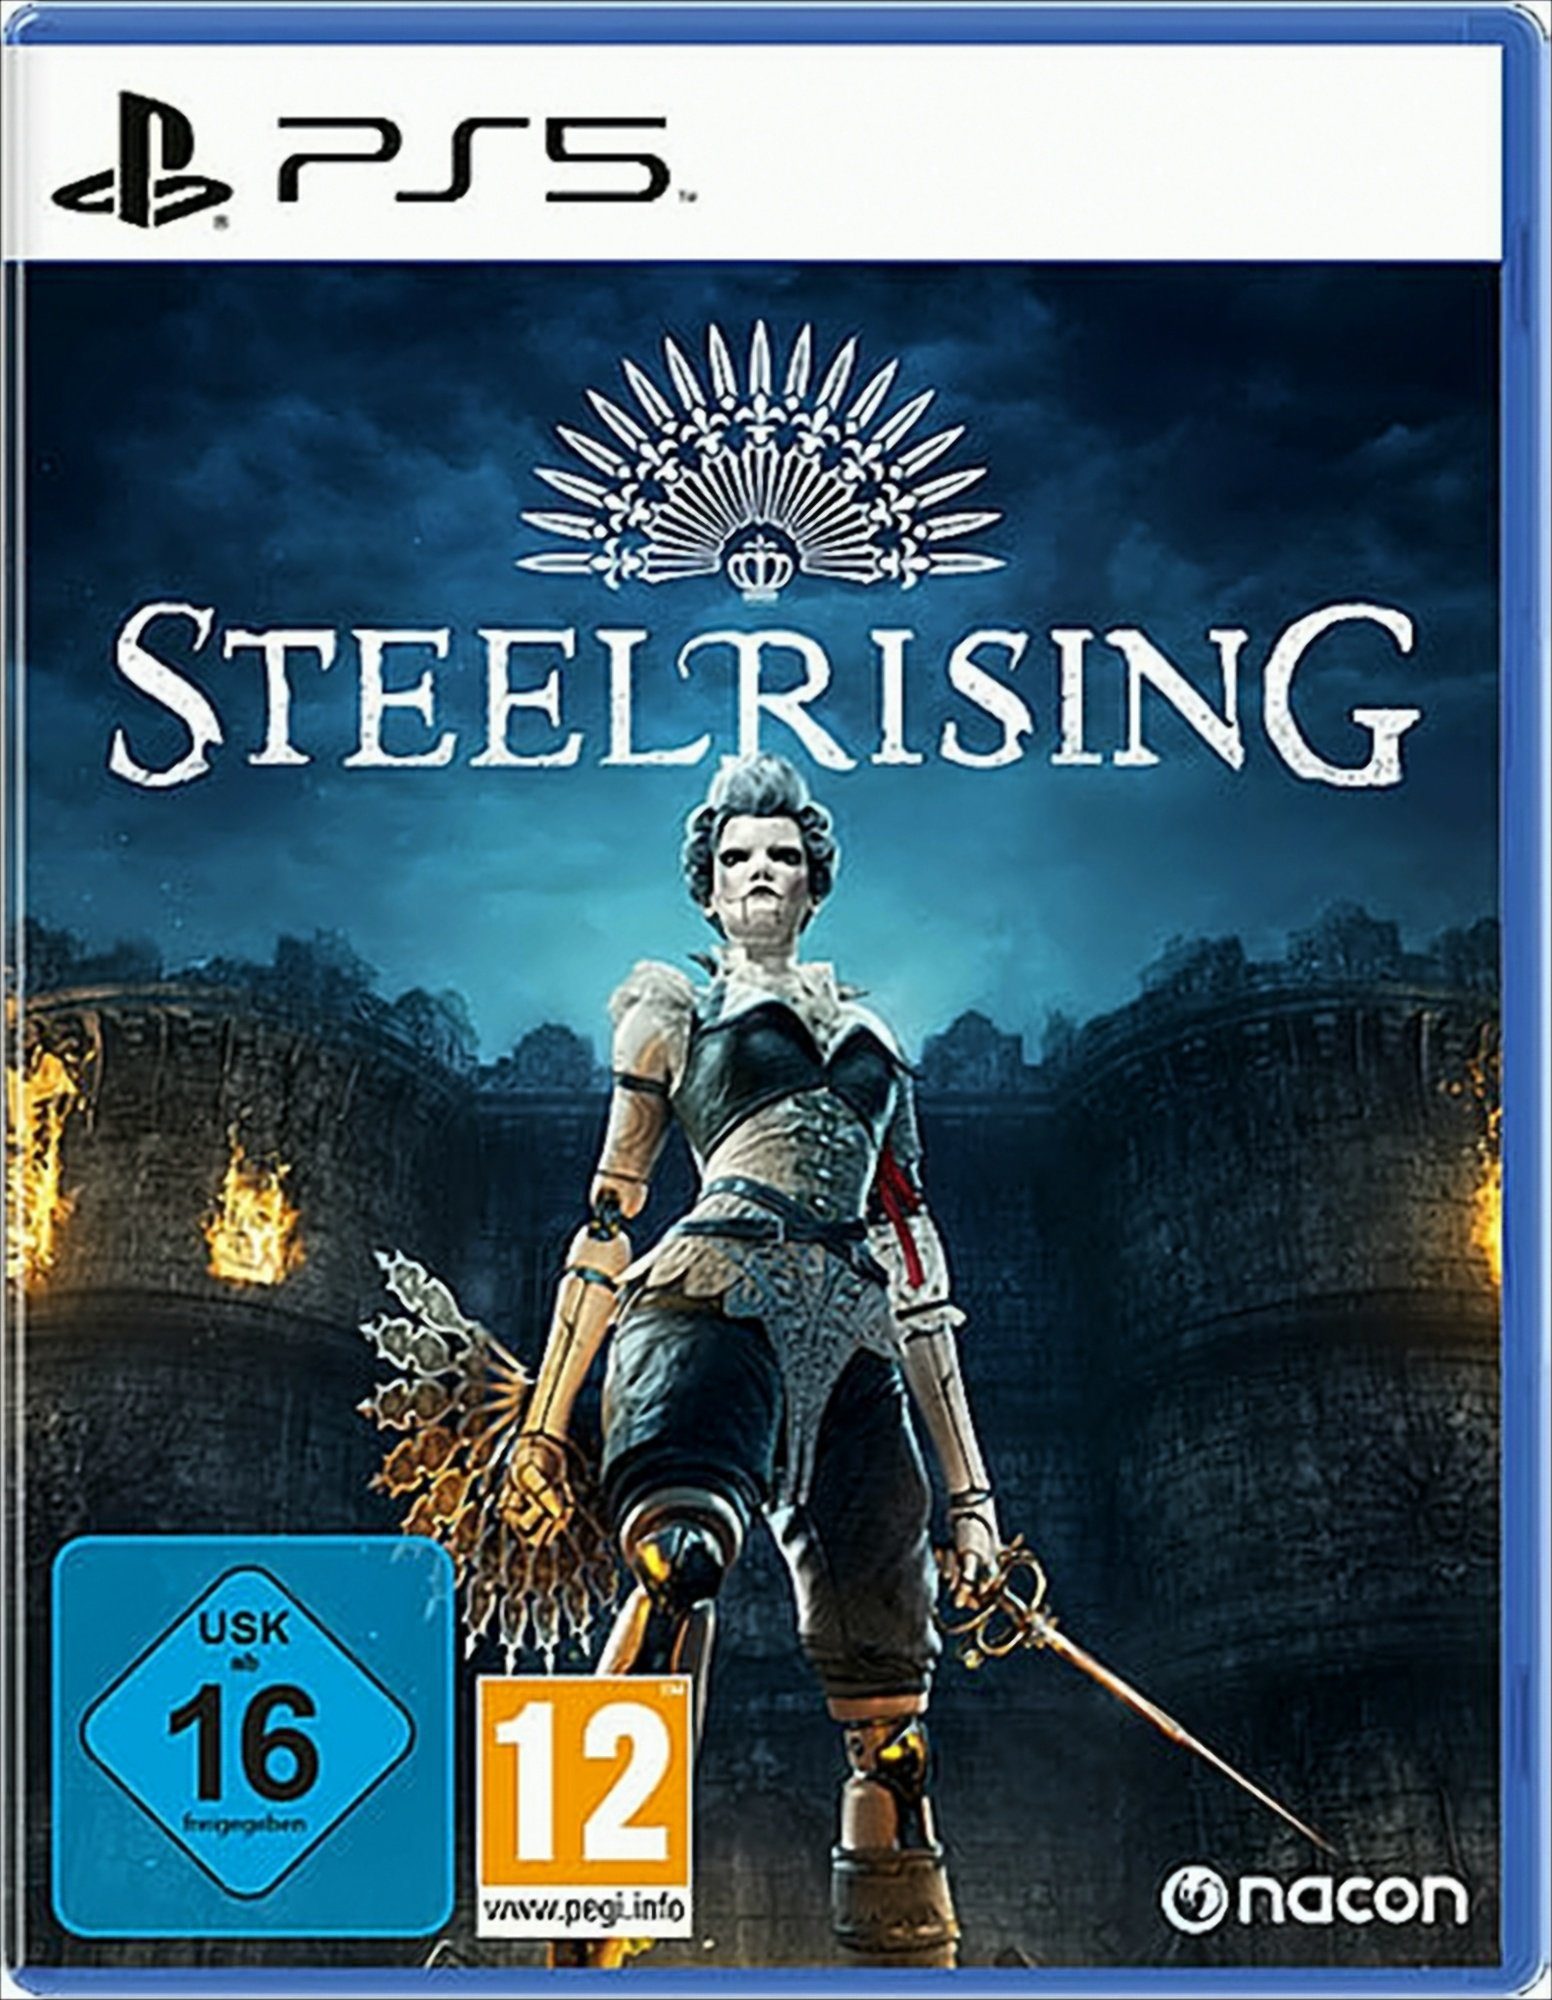 Steelrising PS-5 Playstation 5